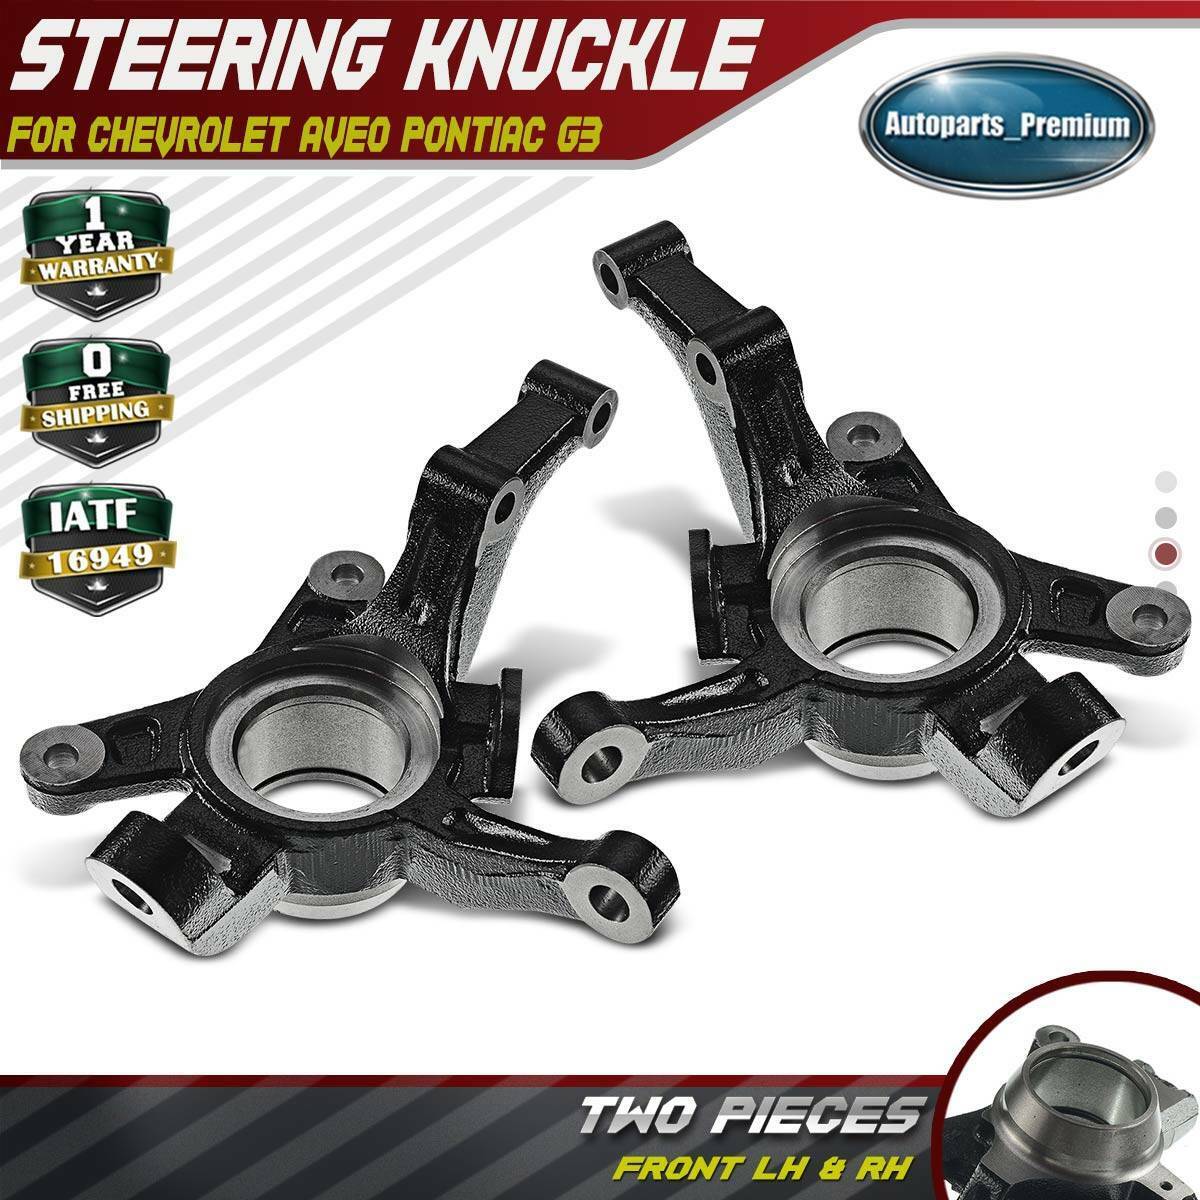 2x Steering Knuckle Front Left & Right for Chevrolet Aveo Aveo5 Pontiac G3 1.6L